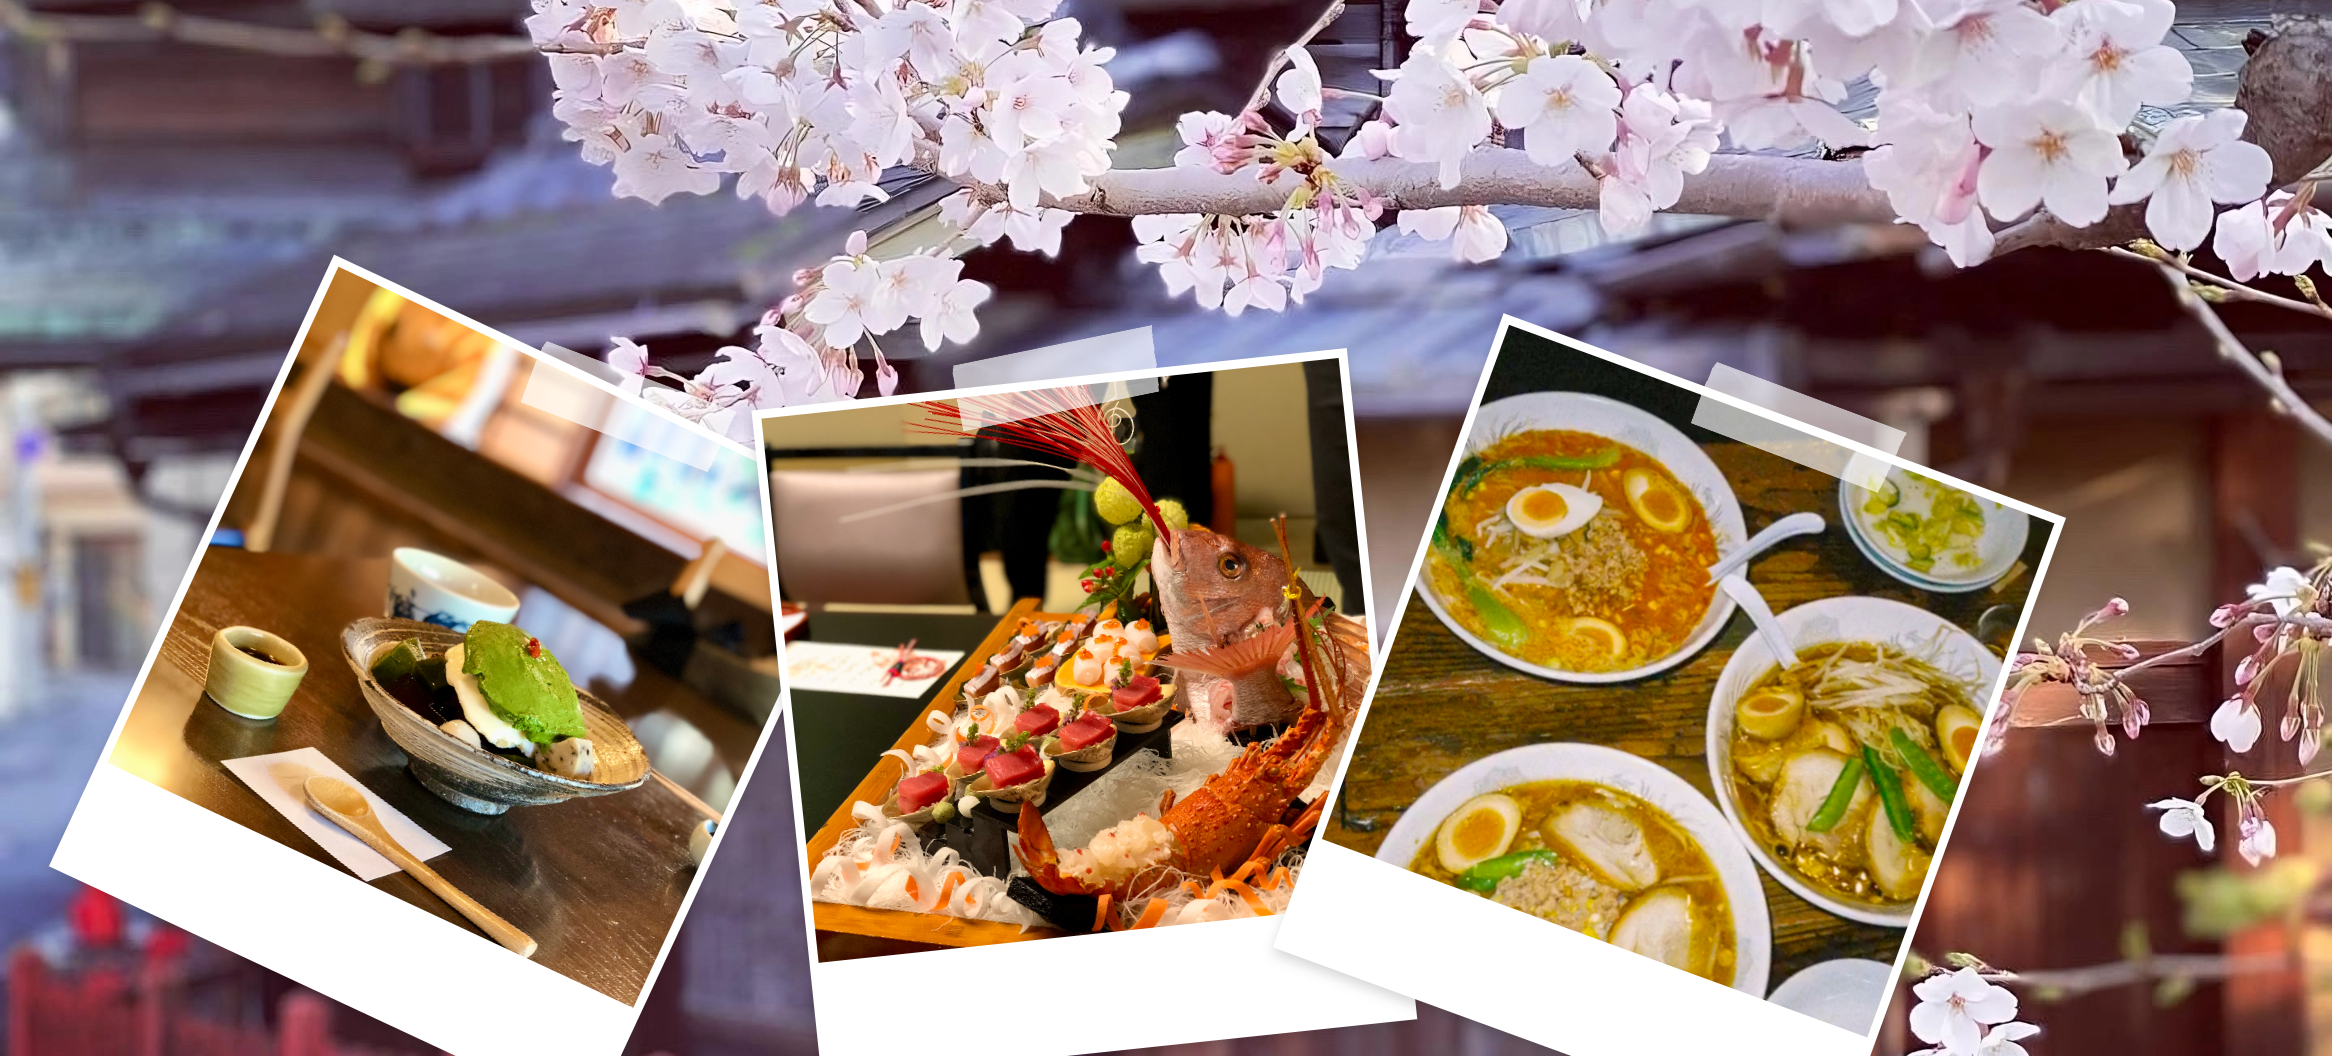 Collage of images featuring a matcha dessert, Japanese fish dish, and ramen over an image of cherry blossoms.